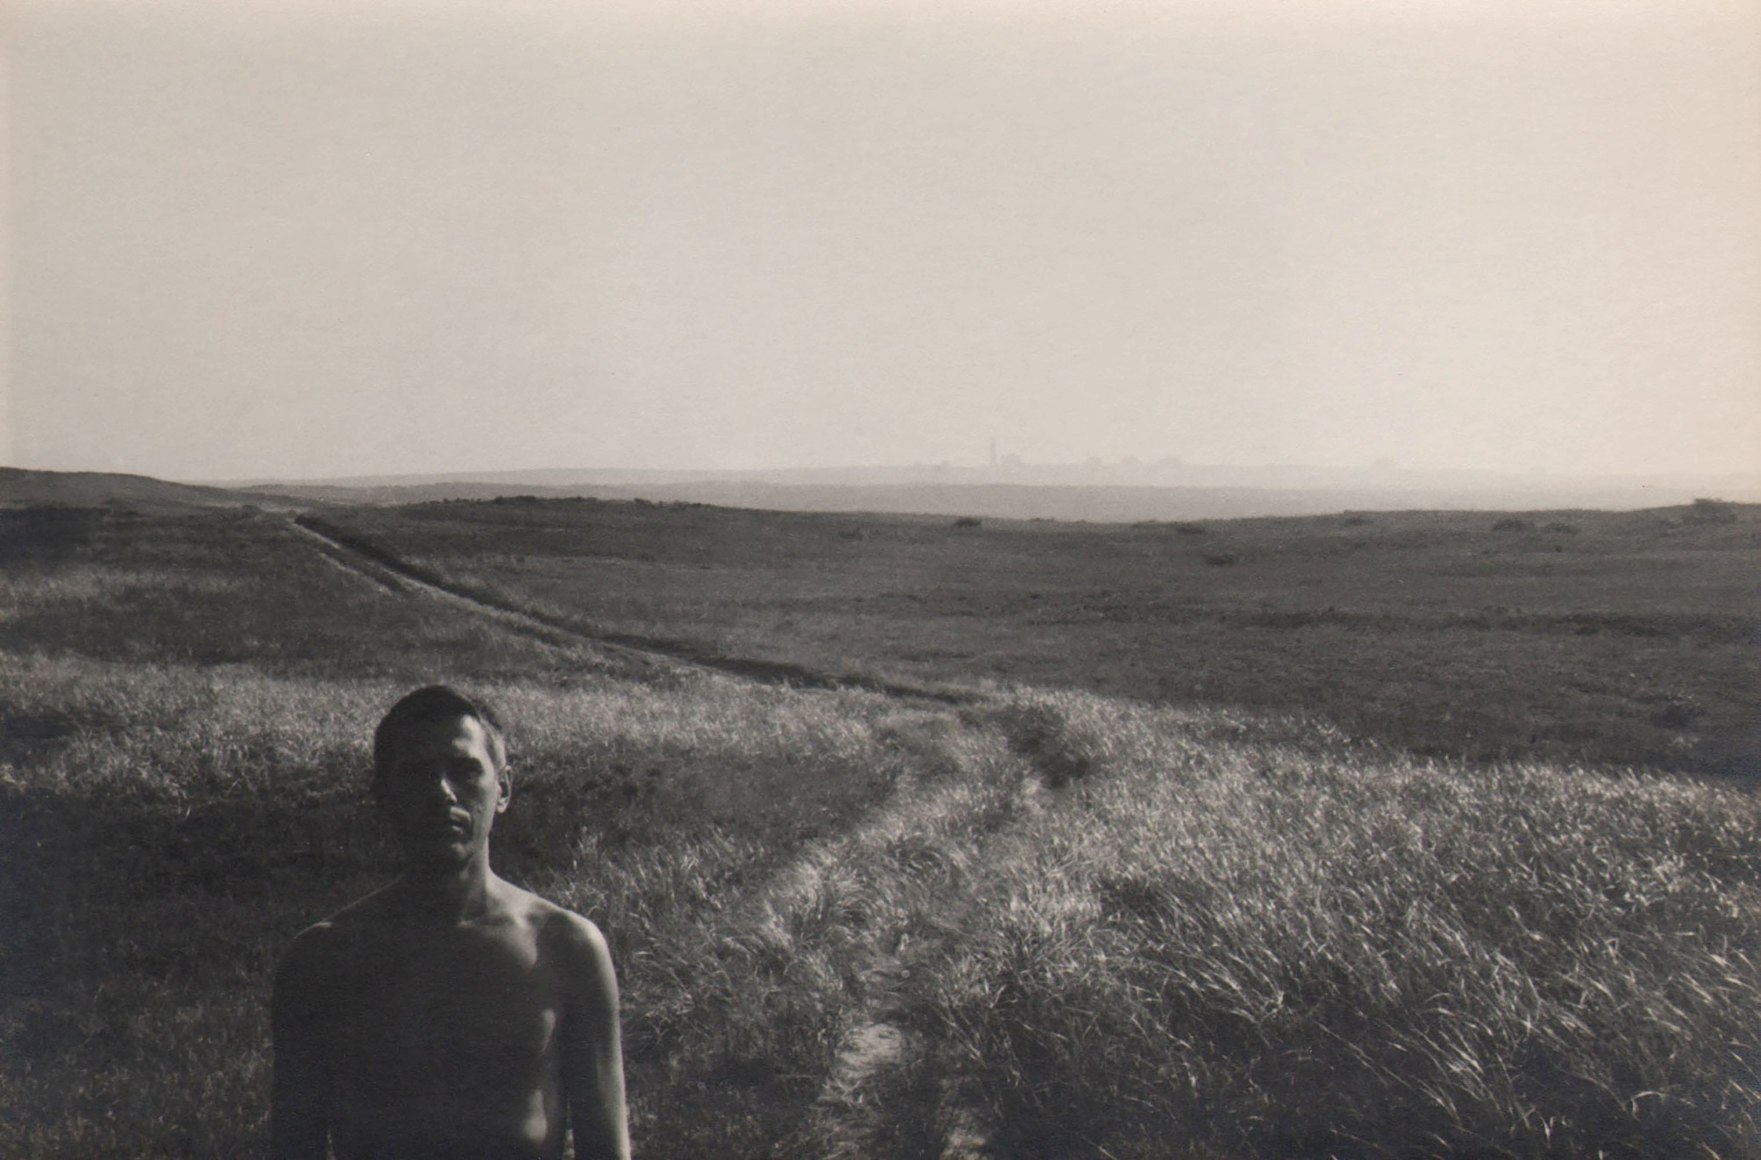 PaJaMa (Jared French), Paul Cadmus, Nantucket, ​1946. Subject stands shirtless in the foreground in the lower left of the frame, a large field in the background.